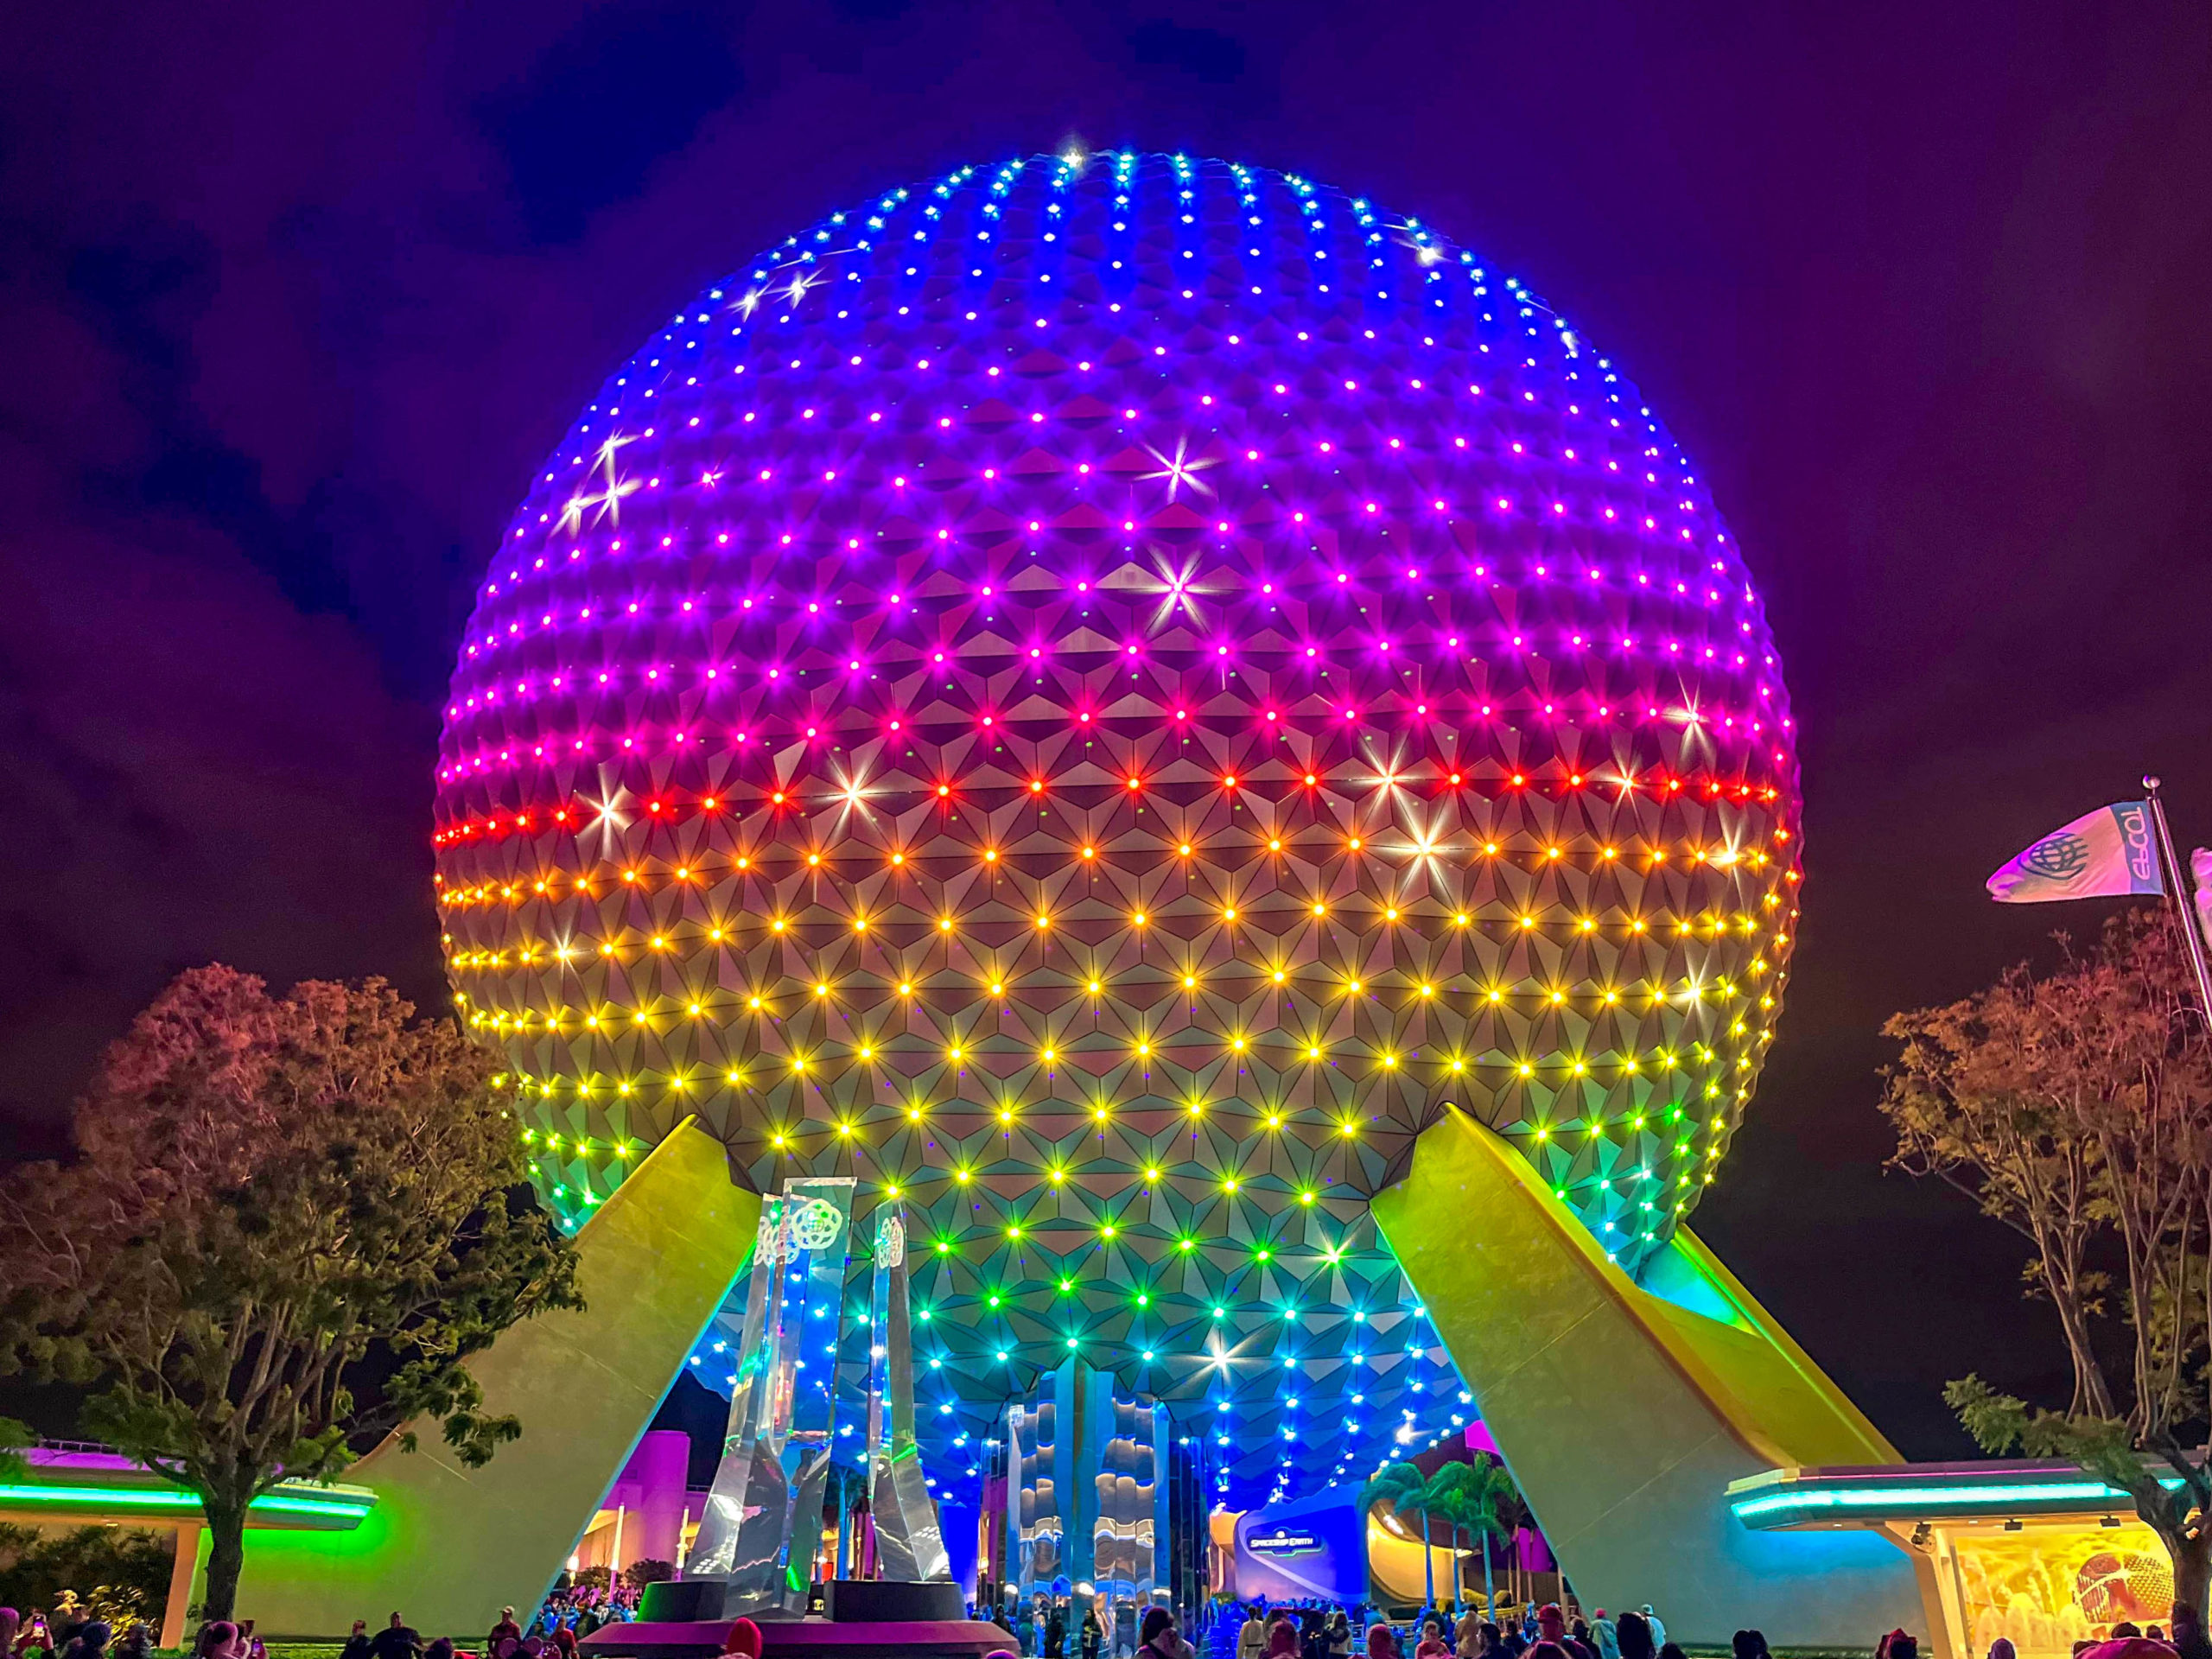 Spaceship Earth Comes to Life With Imagination For Festival of the Arts -  